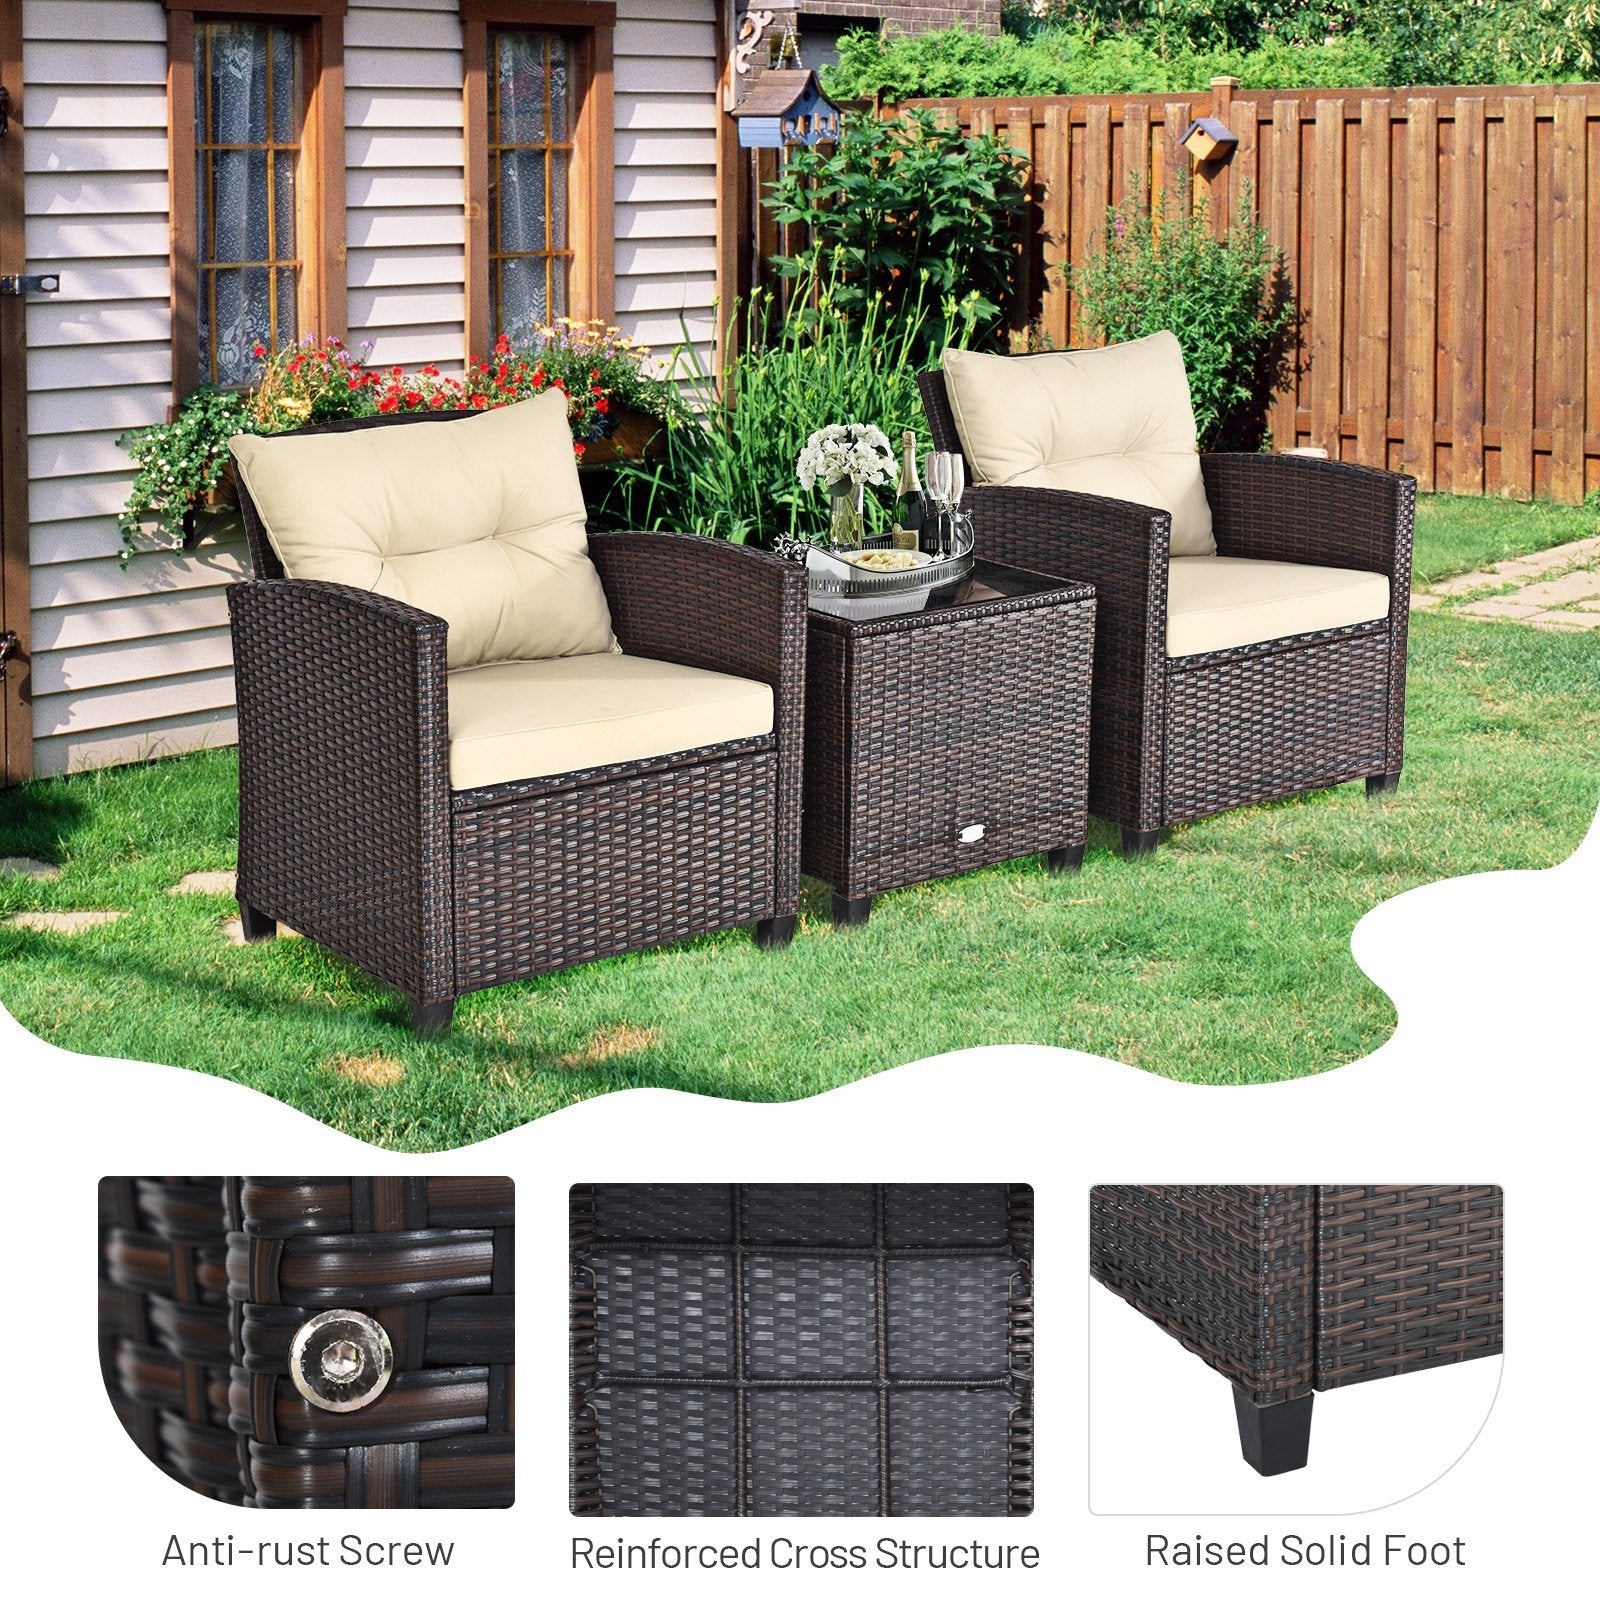 3 Pieces Patio Rattan Furniture Set with 4 Removable Cushions, Beige - Gallery Canada